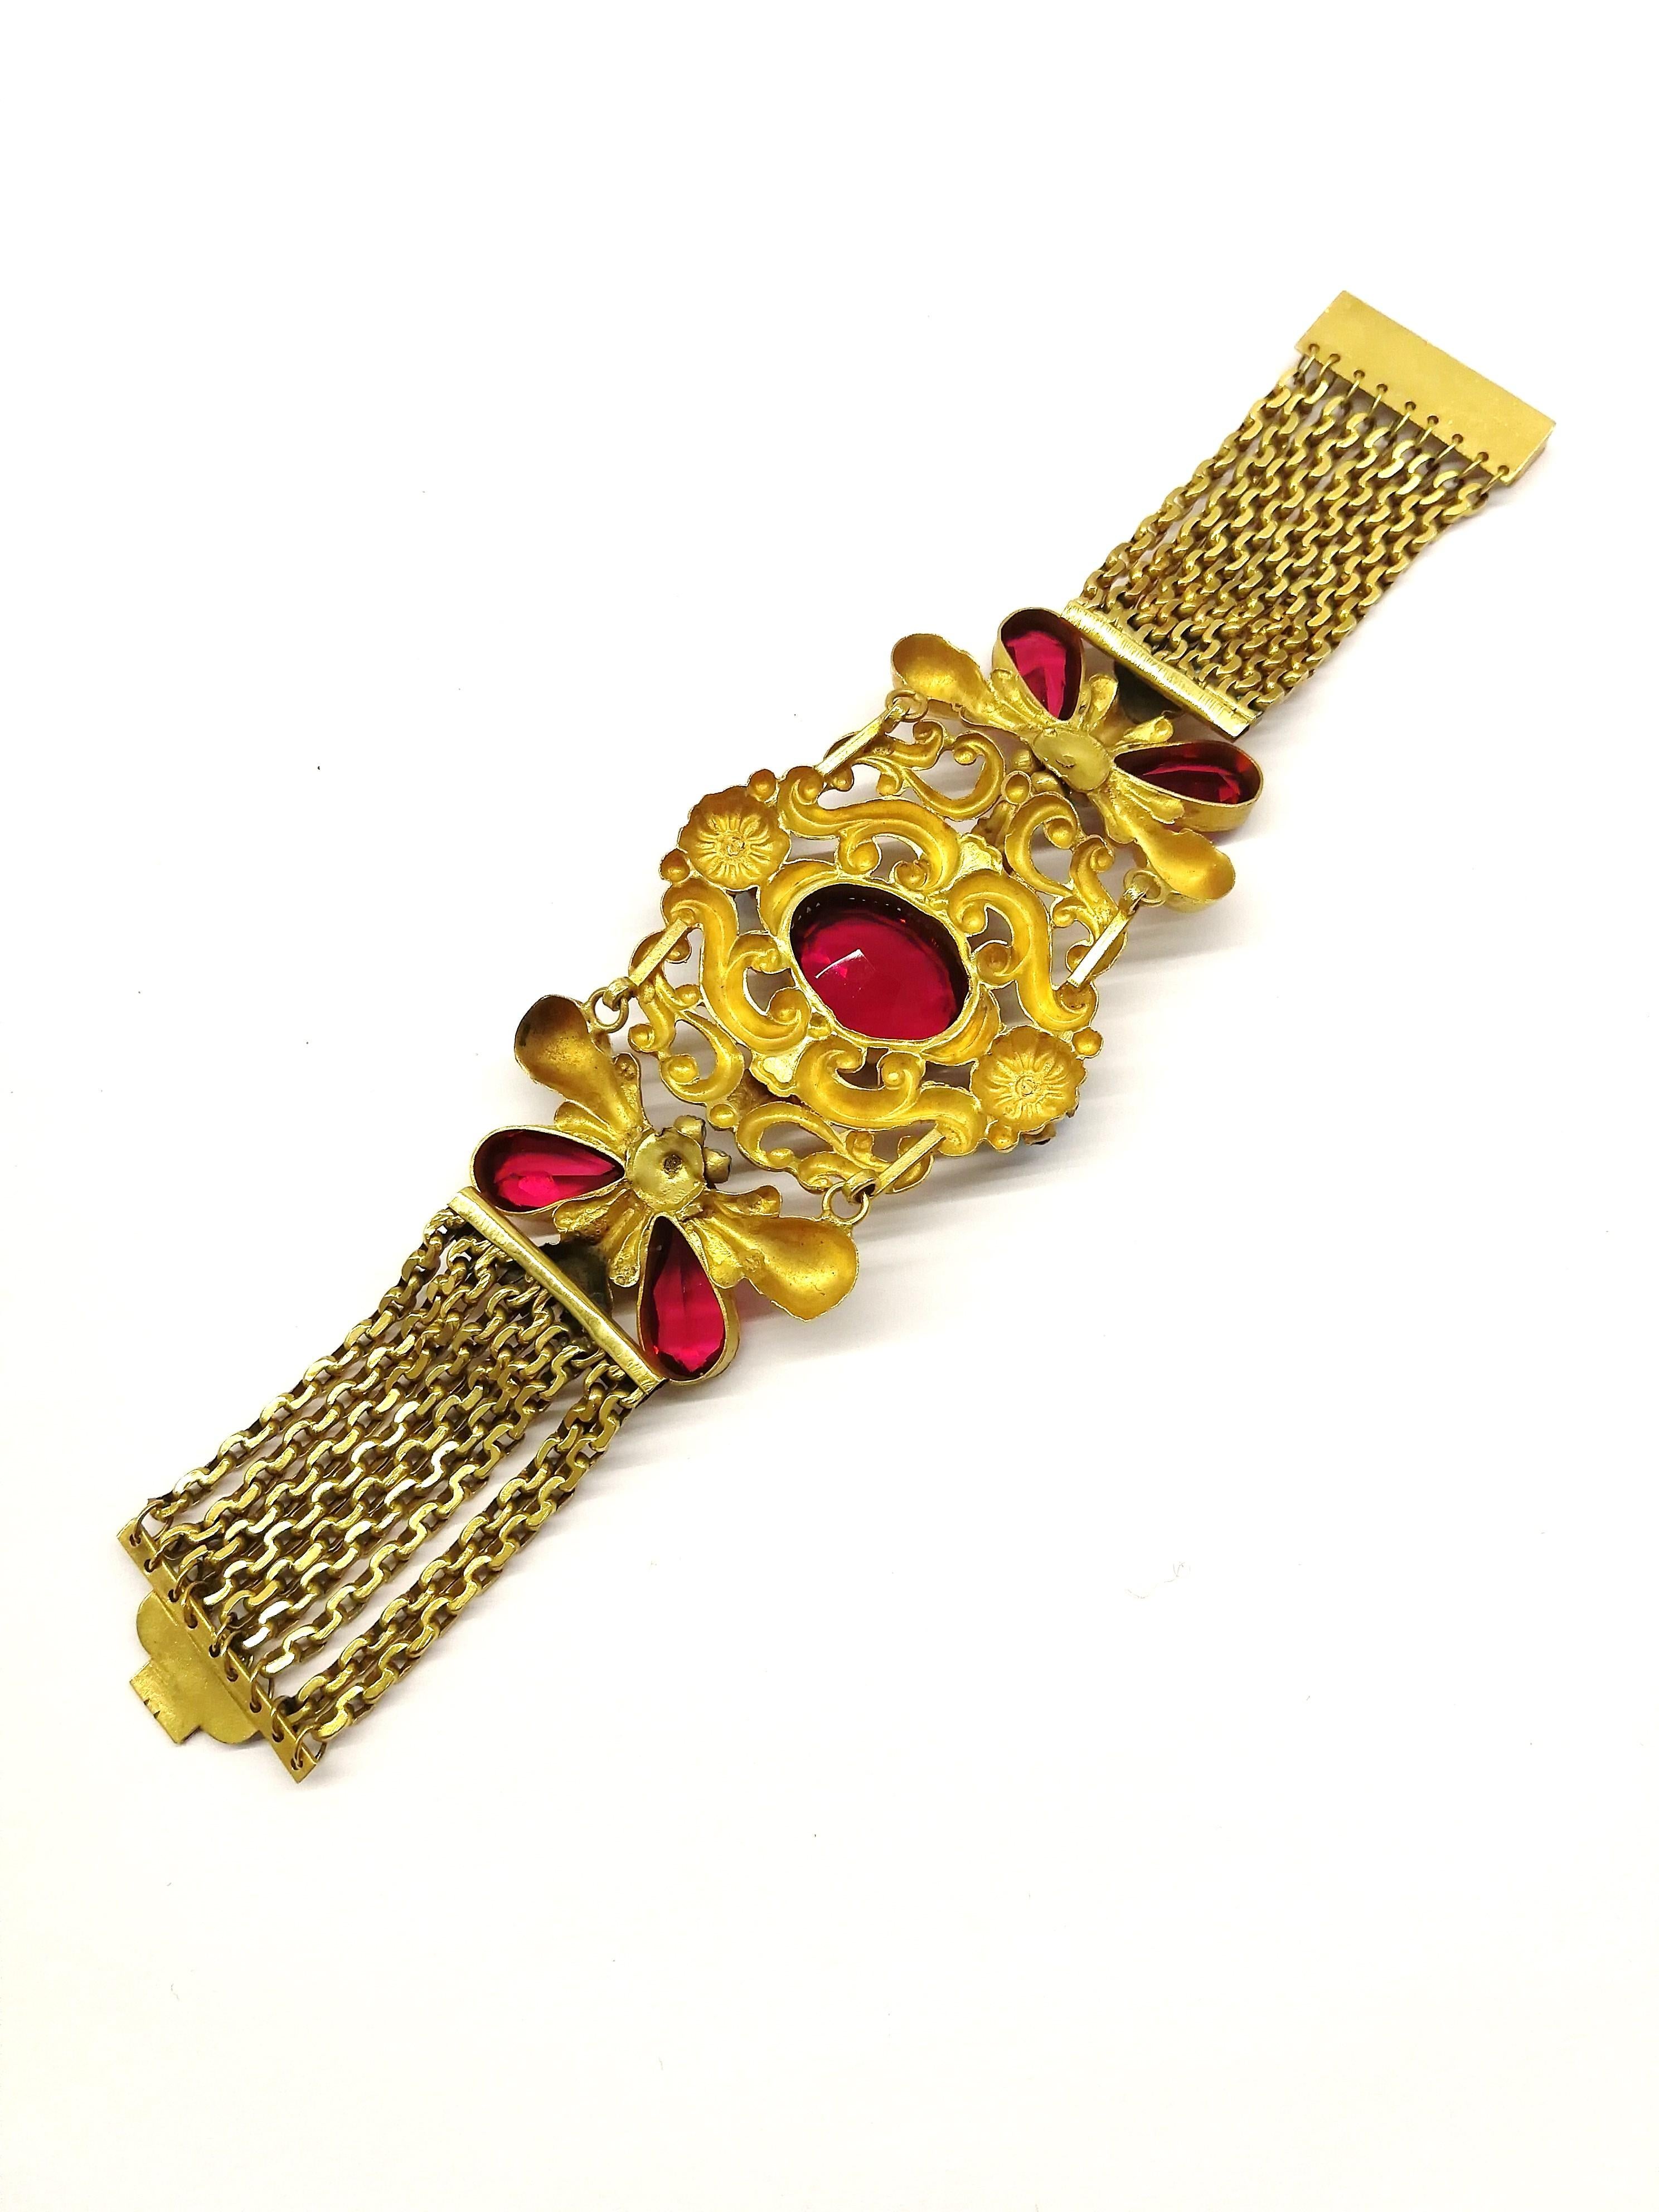 A very striking and dramatic bracelet in a Victorian or Baroque style, with ruby, pearl  and turquoise pastes of varying sizes. Set with an articulated metal centrepiece, nine rows of flat chain form part of the bracelet, meeting in a firm and fixed